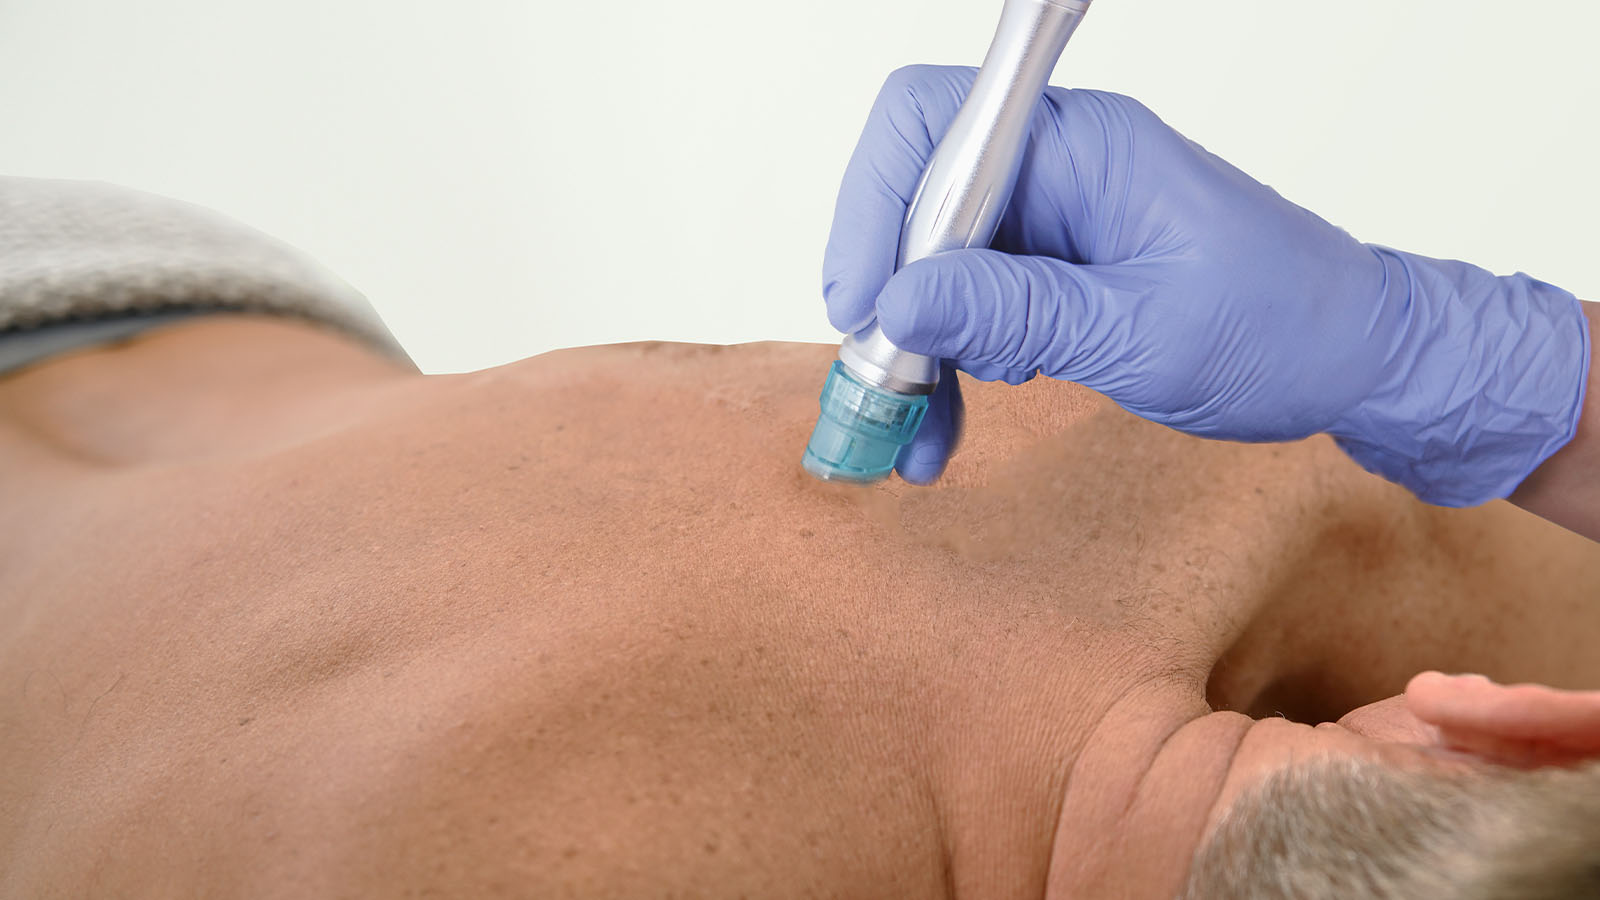 Microdermabrasion treatment for the whole body at Bodyland Rotterdam